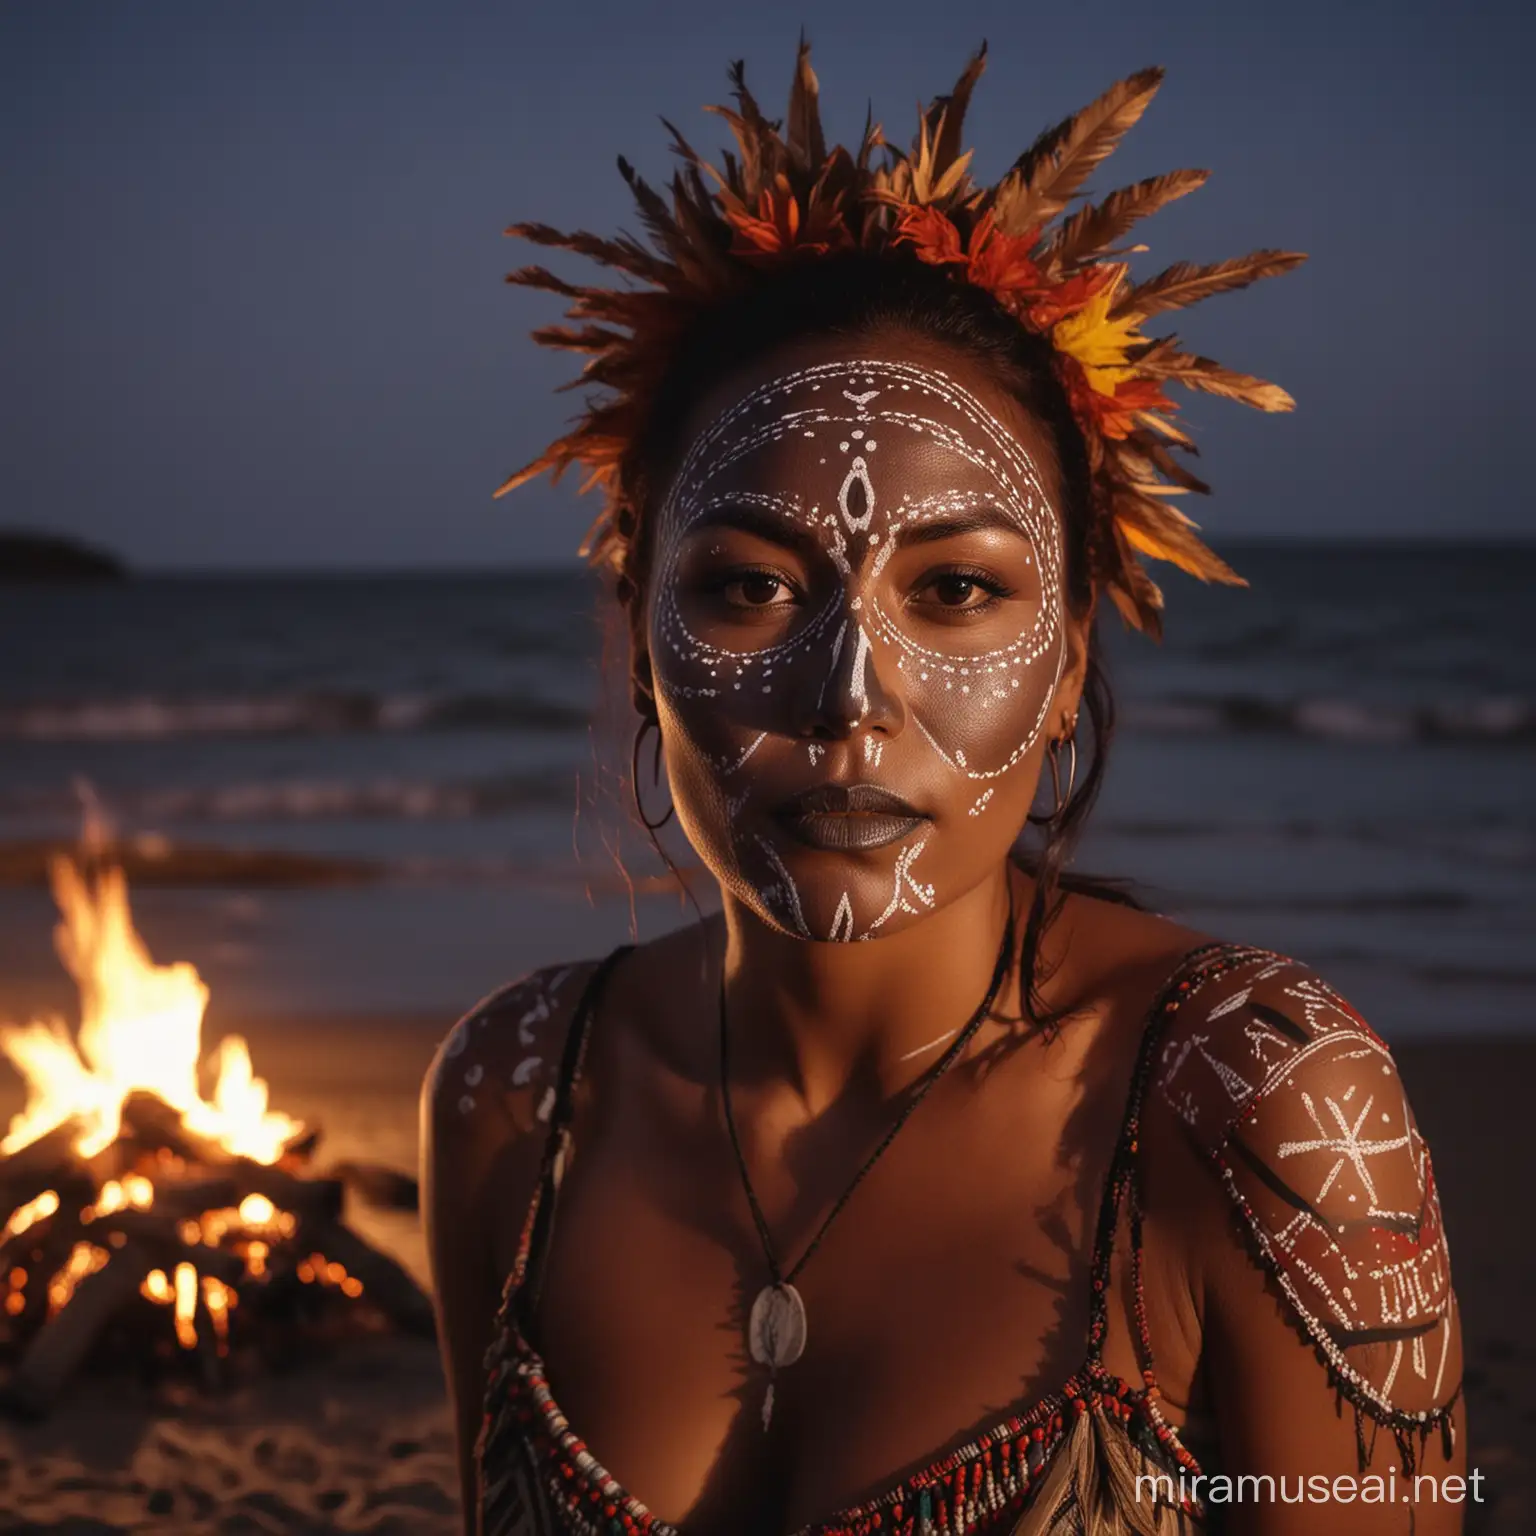 Indigenous Woman Performing Voodoo Rituals by a Bonfire on the Beach at Night